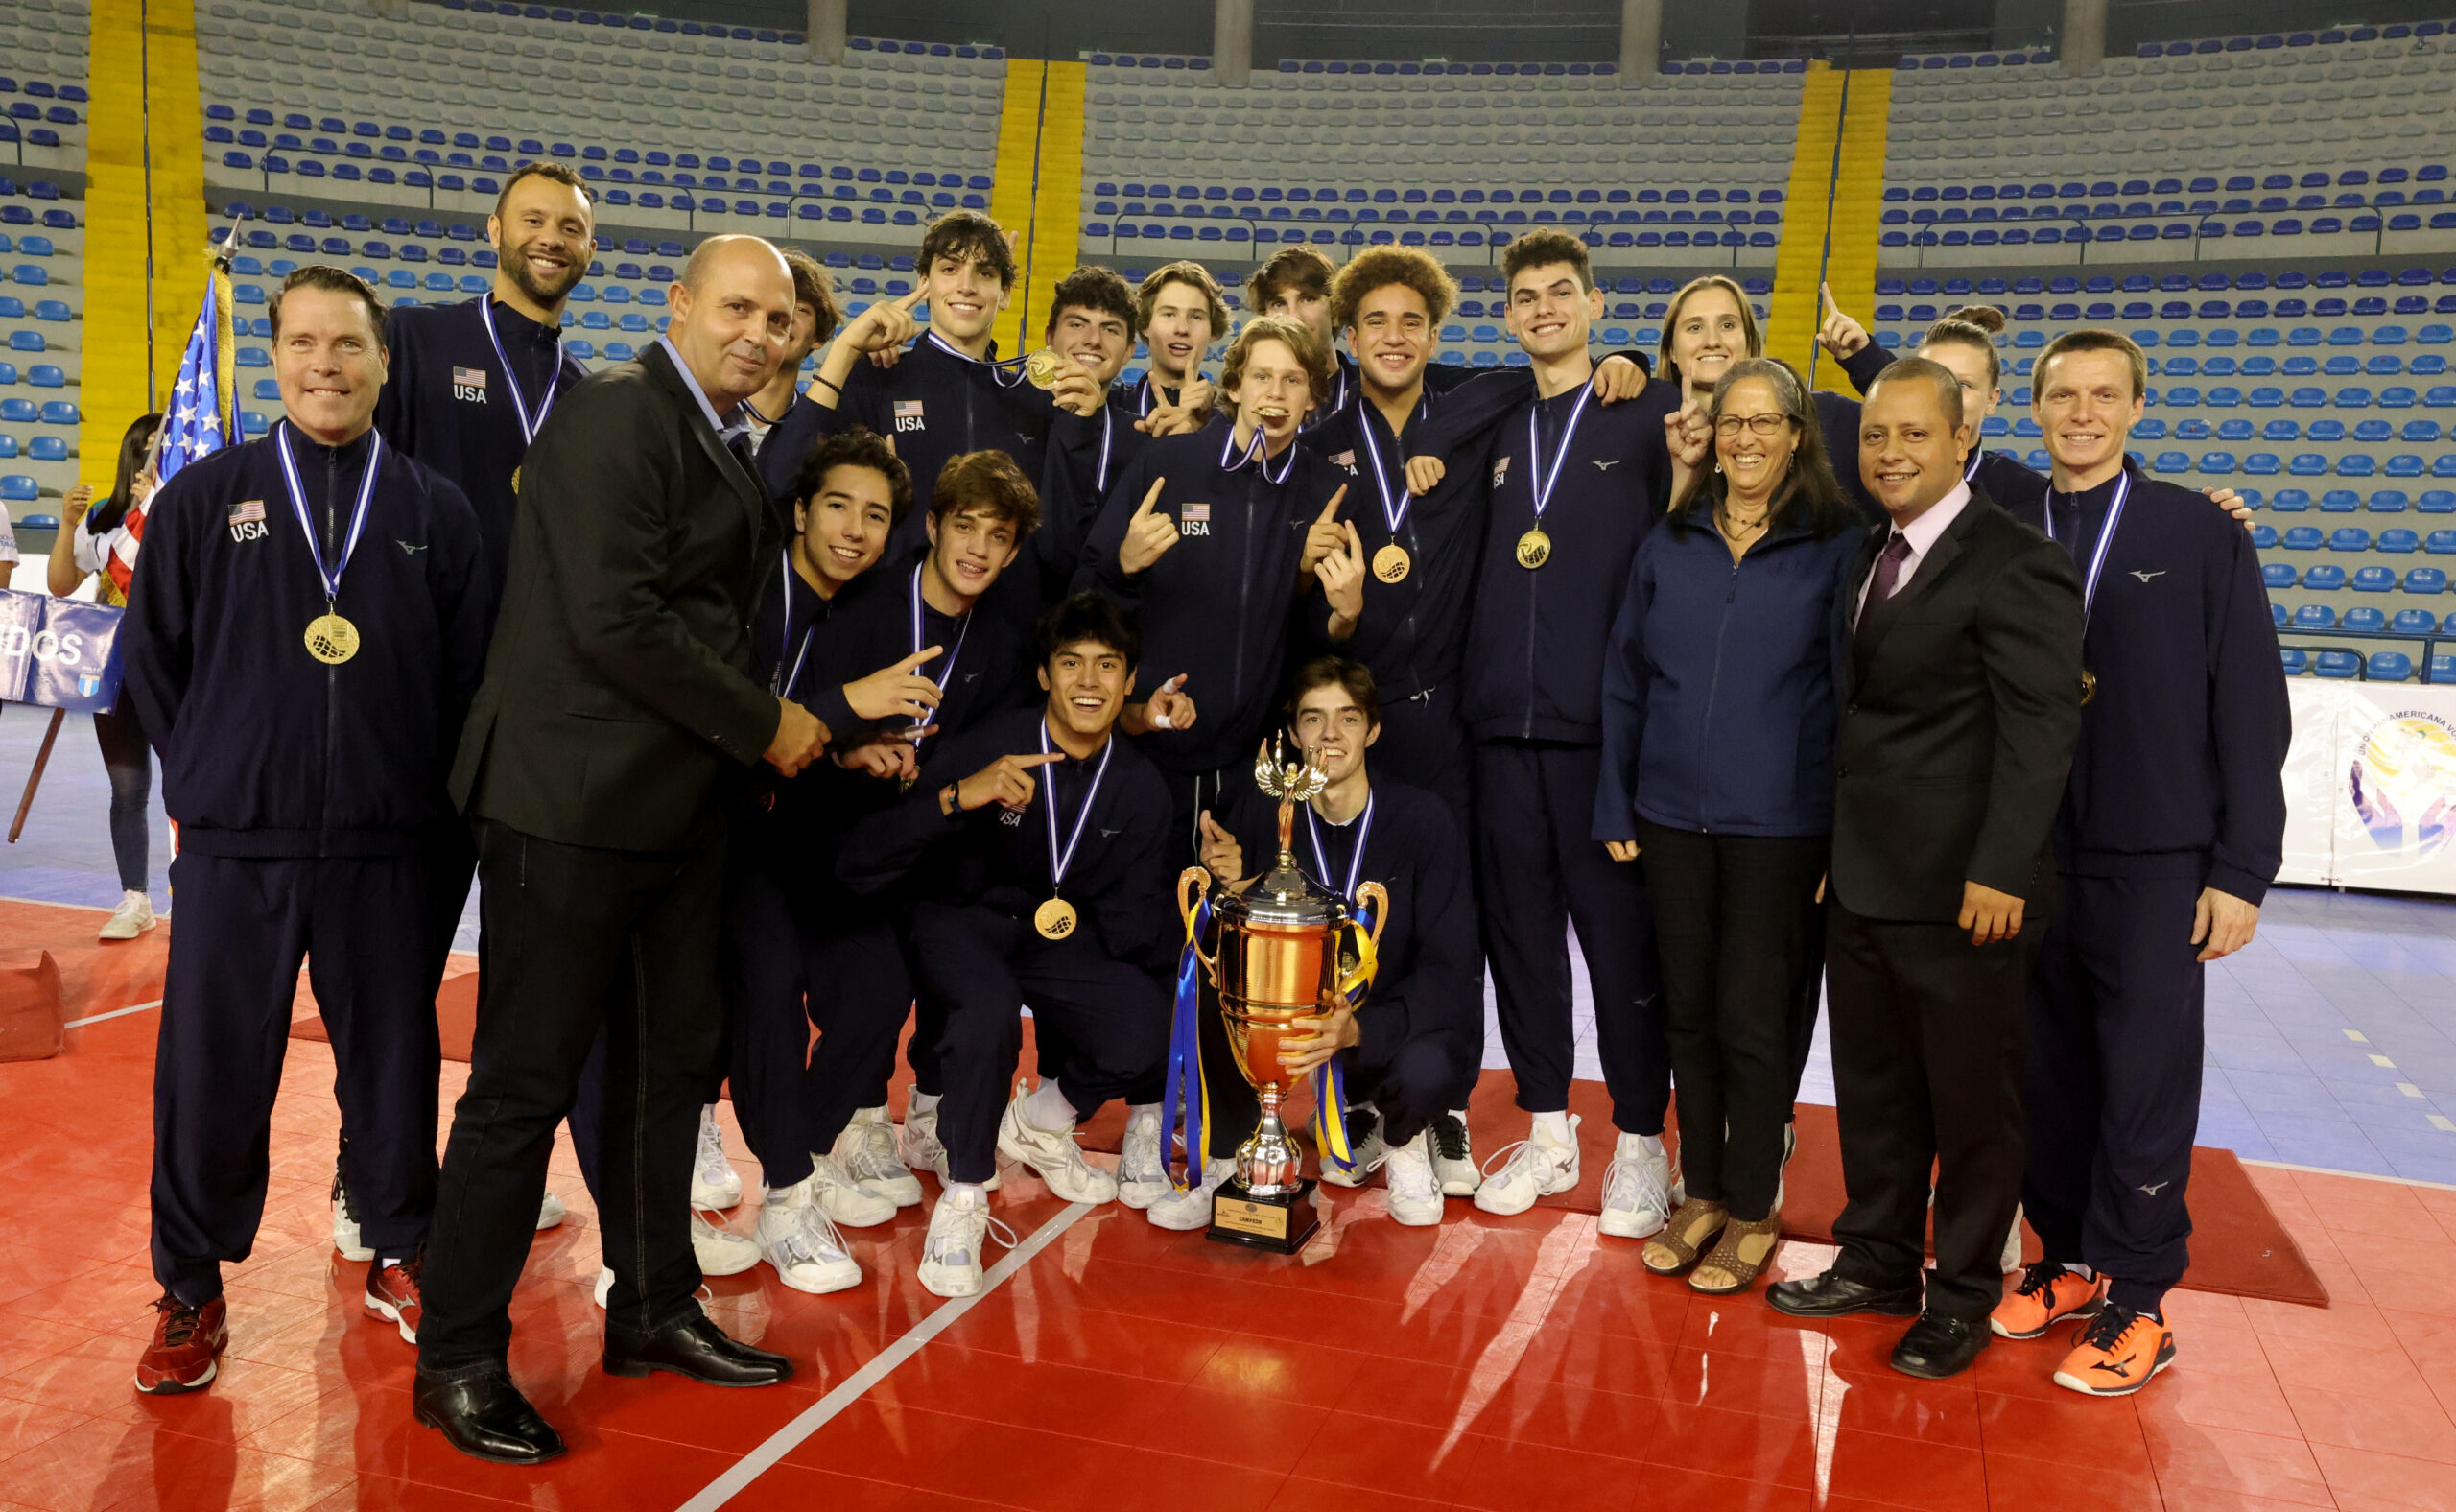 United States Undefeated champion of the Boys U19 Pan American Cup